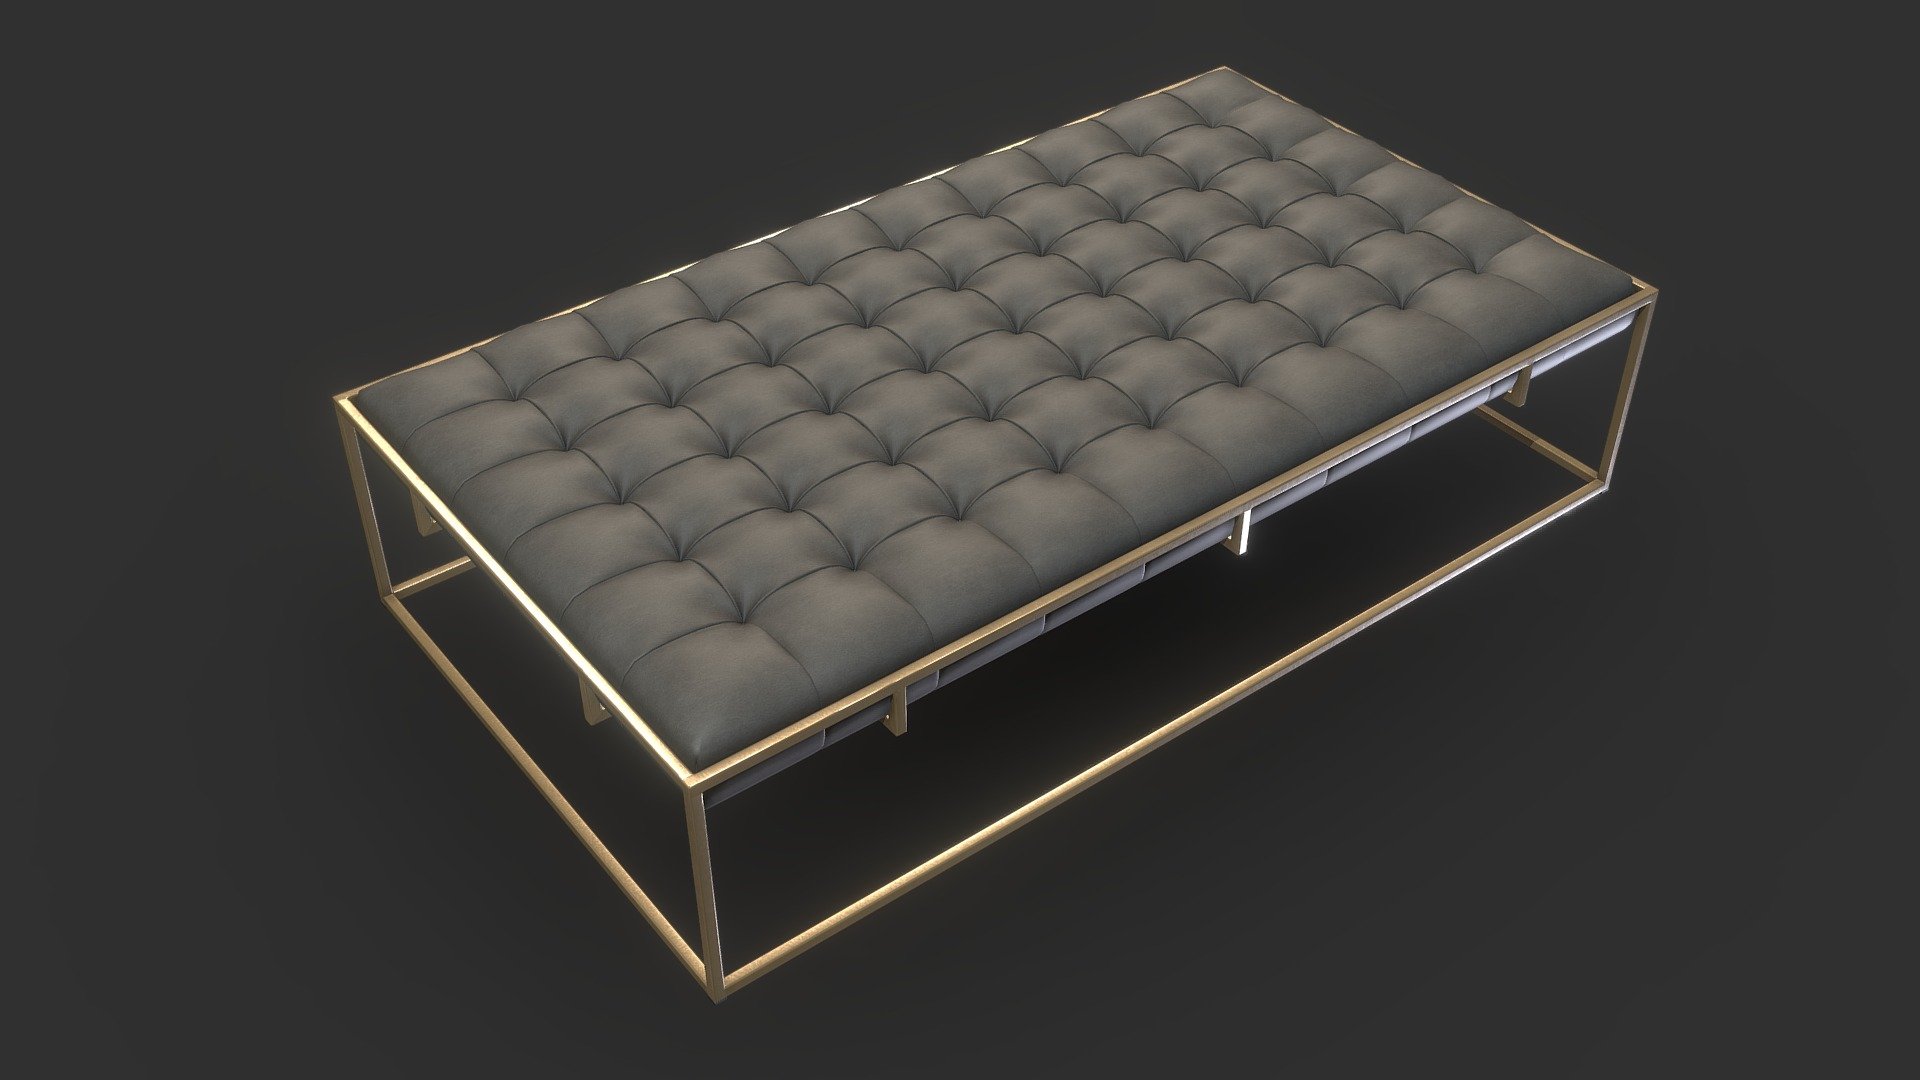 Ottilie Ottoman in Brass from Crate &amp; Barrel

Dimensions:

W 1600 x D 900 x H 390

Seat height: 390 mm

Model link: https://3dsky.org/3dmodels/show/ottilie_ottoman

Tags: tufted, bench, library, traditional, leather, cocktail, cushion, parsons-style, belgium - Ottilie Ottoman - Brass & Leather - Buy Royalty Free 3D model by RC3D (@rc.3d) 3d model